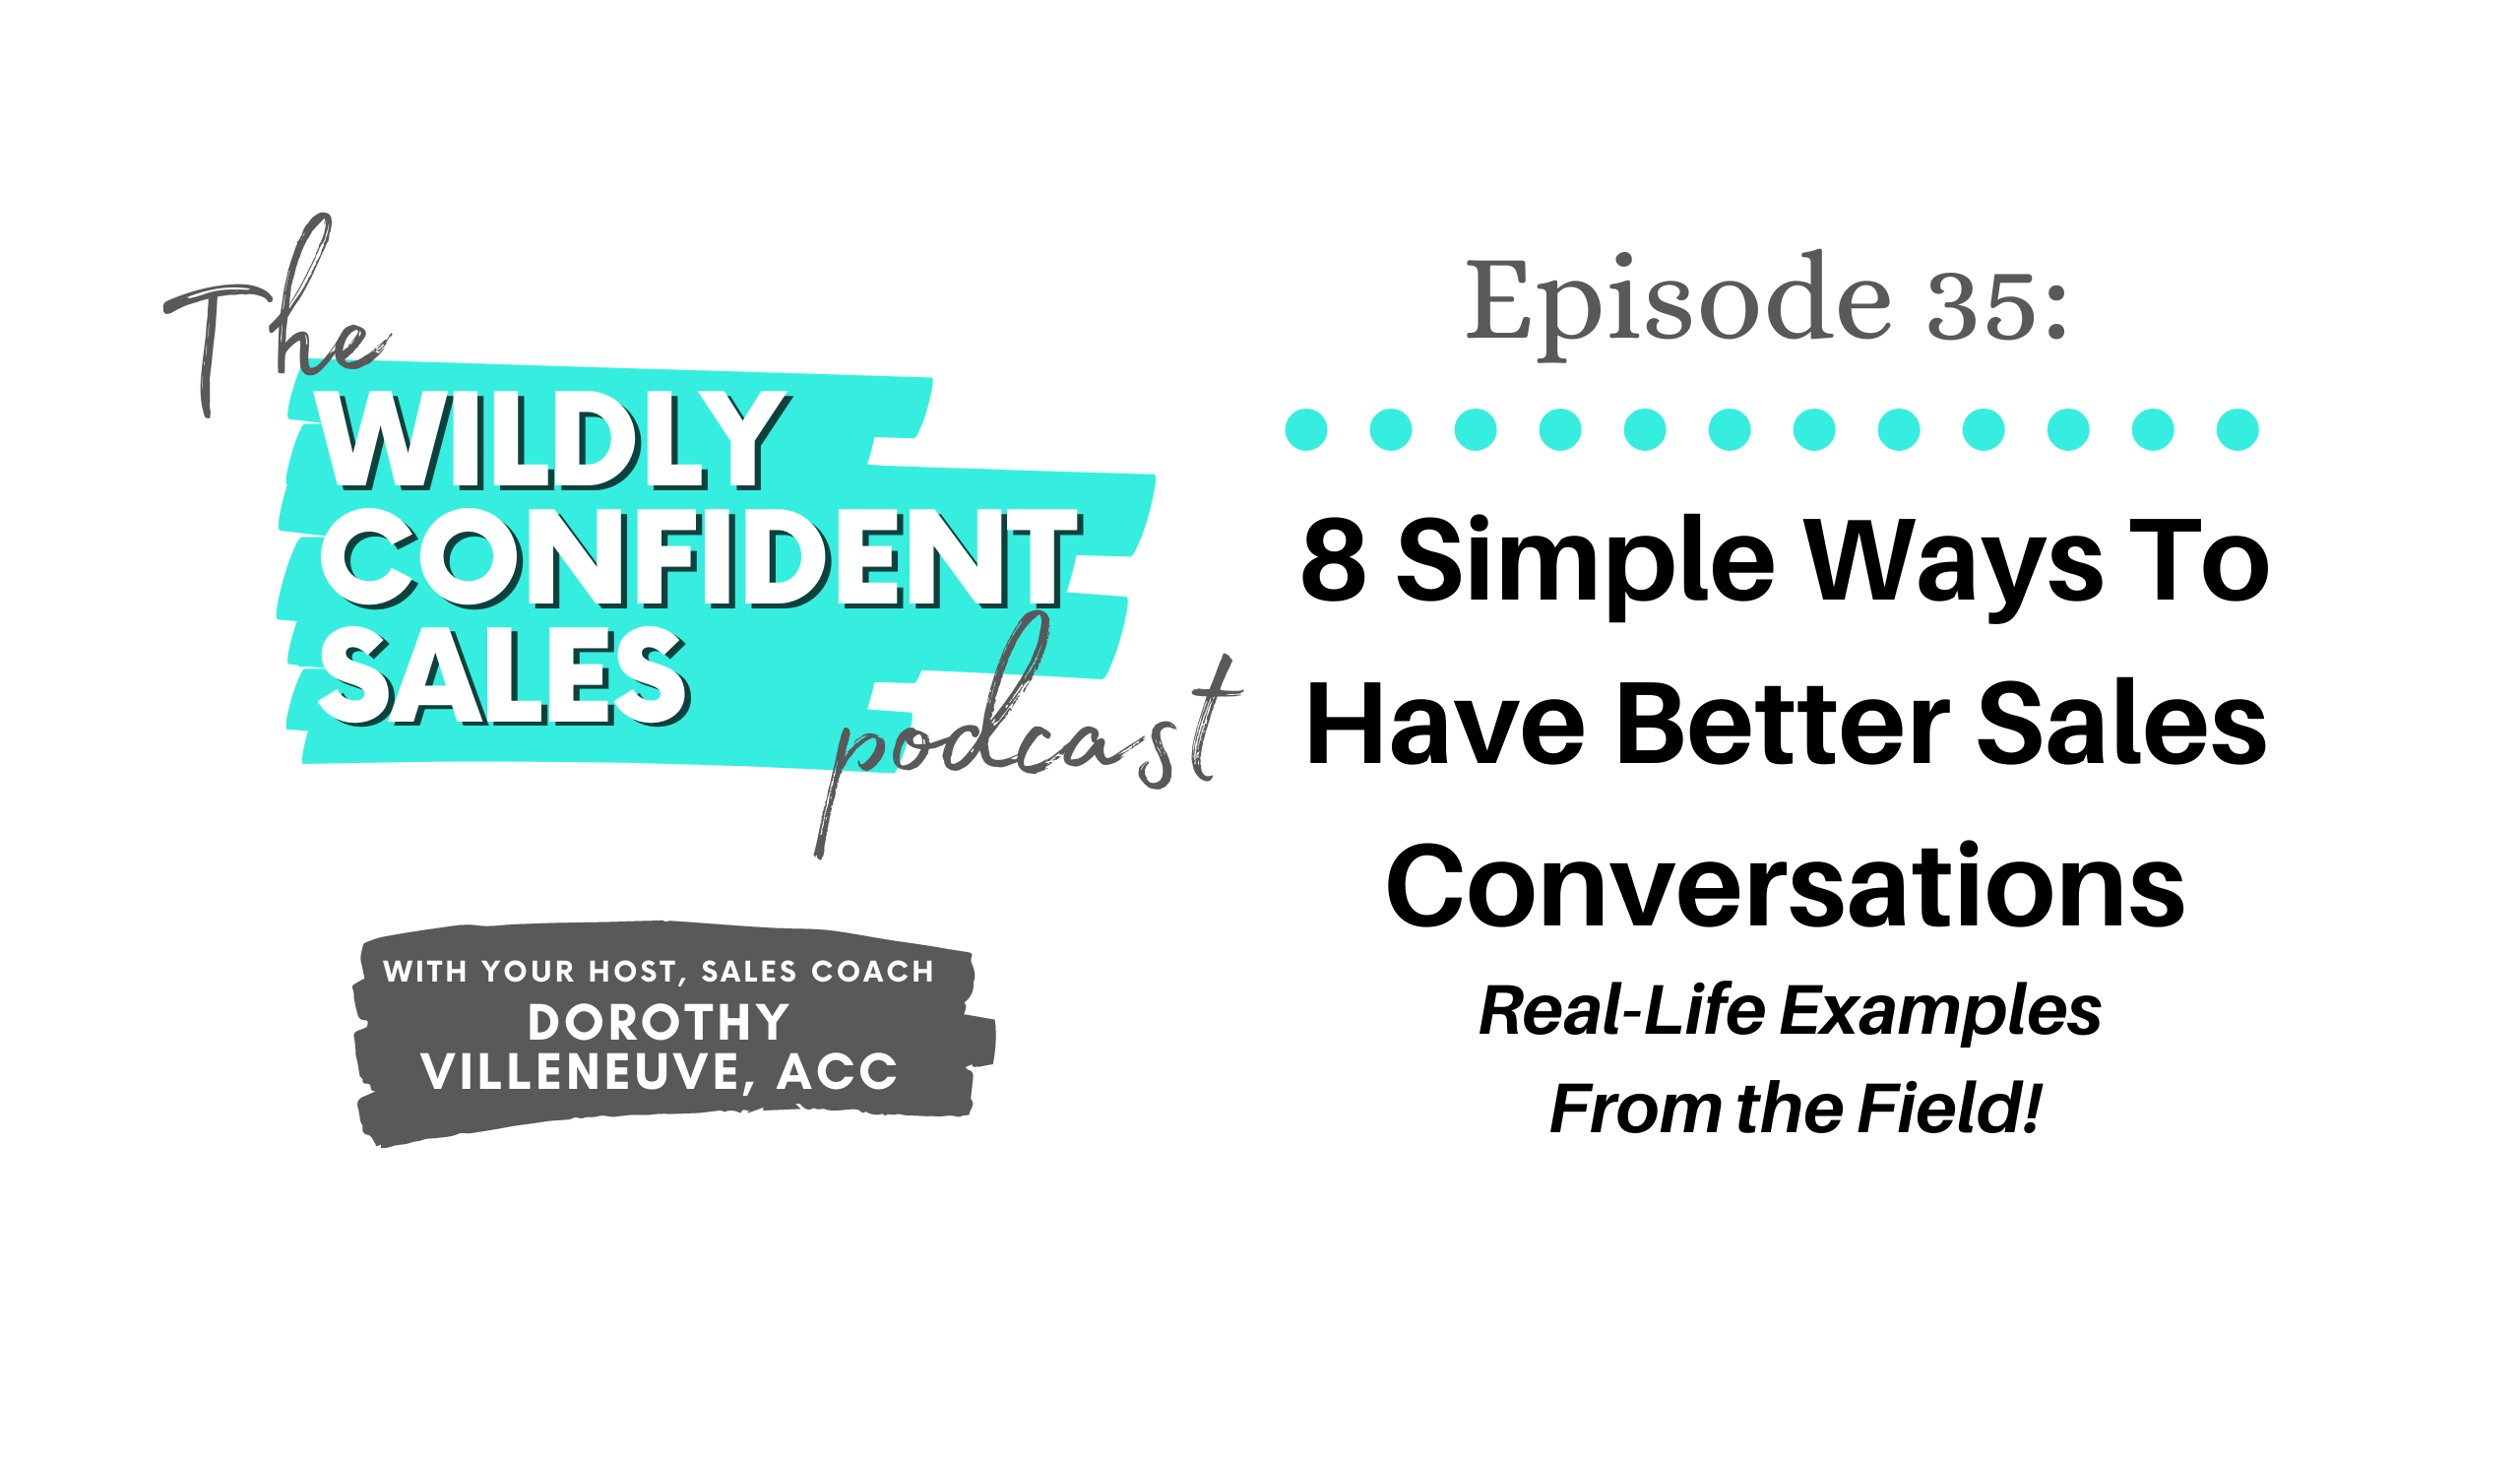 8 Simple Ways To Have Better Sales Conversations – Real-Life Examples From the Field